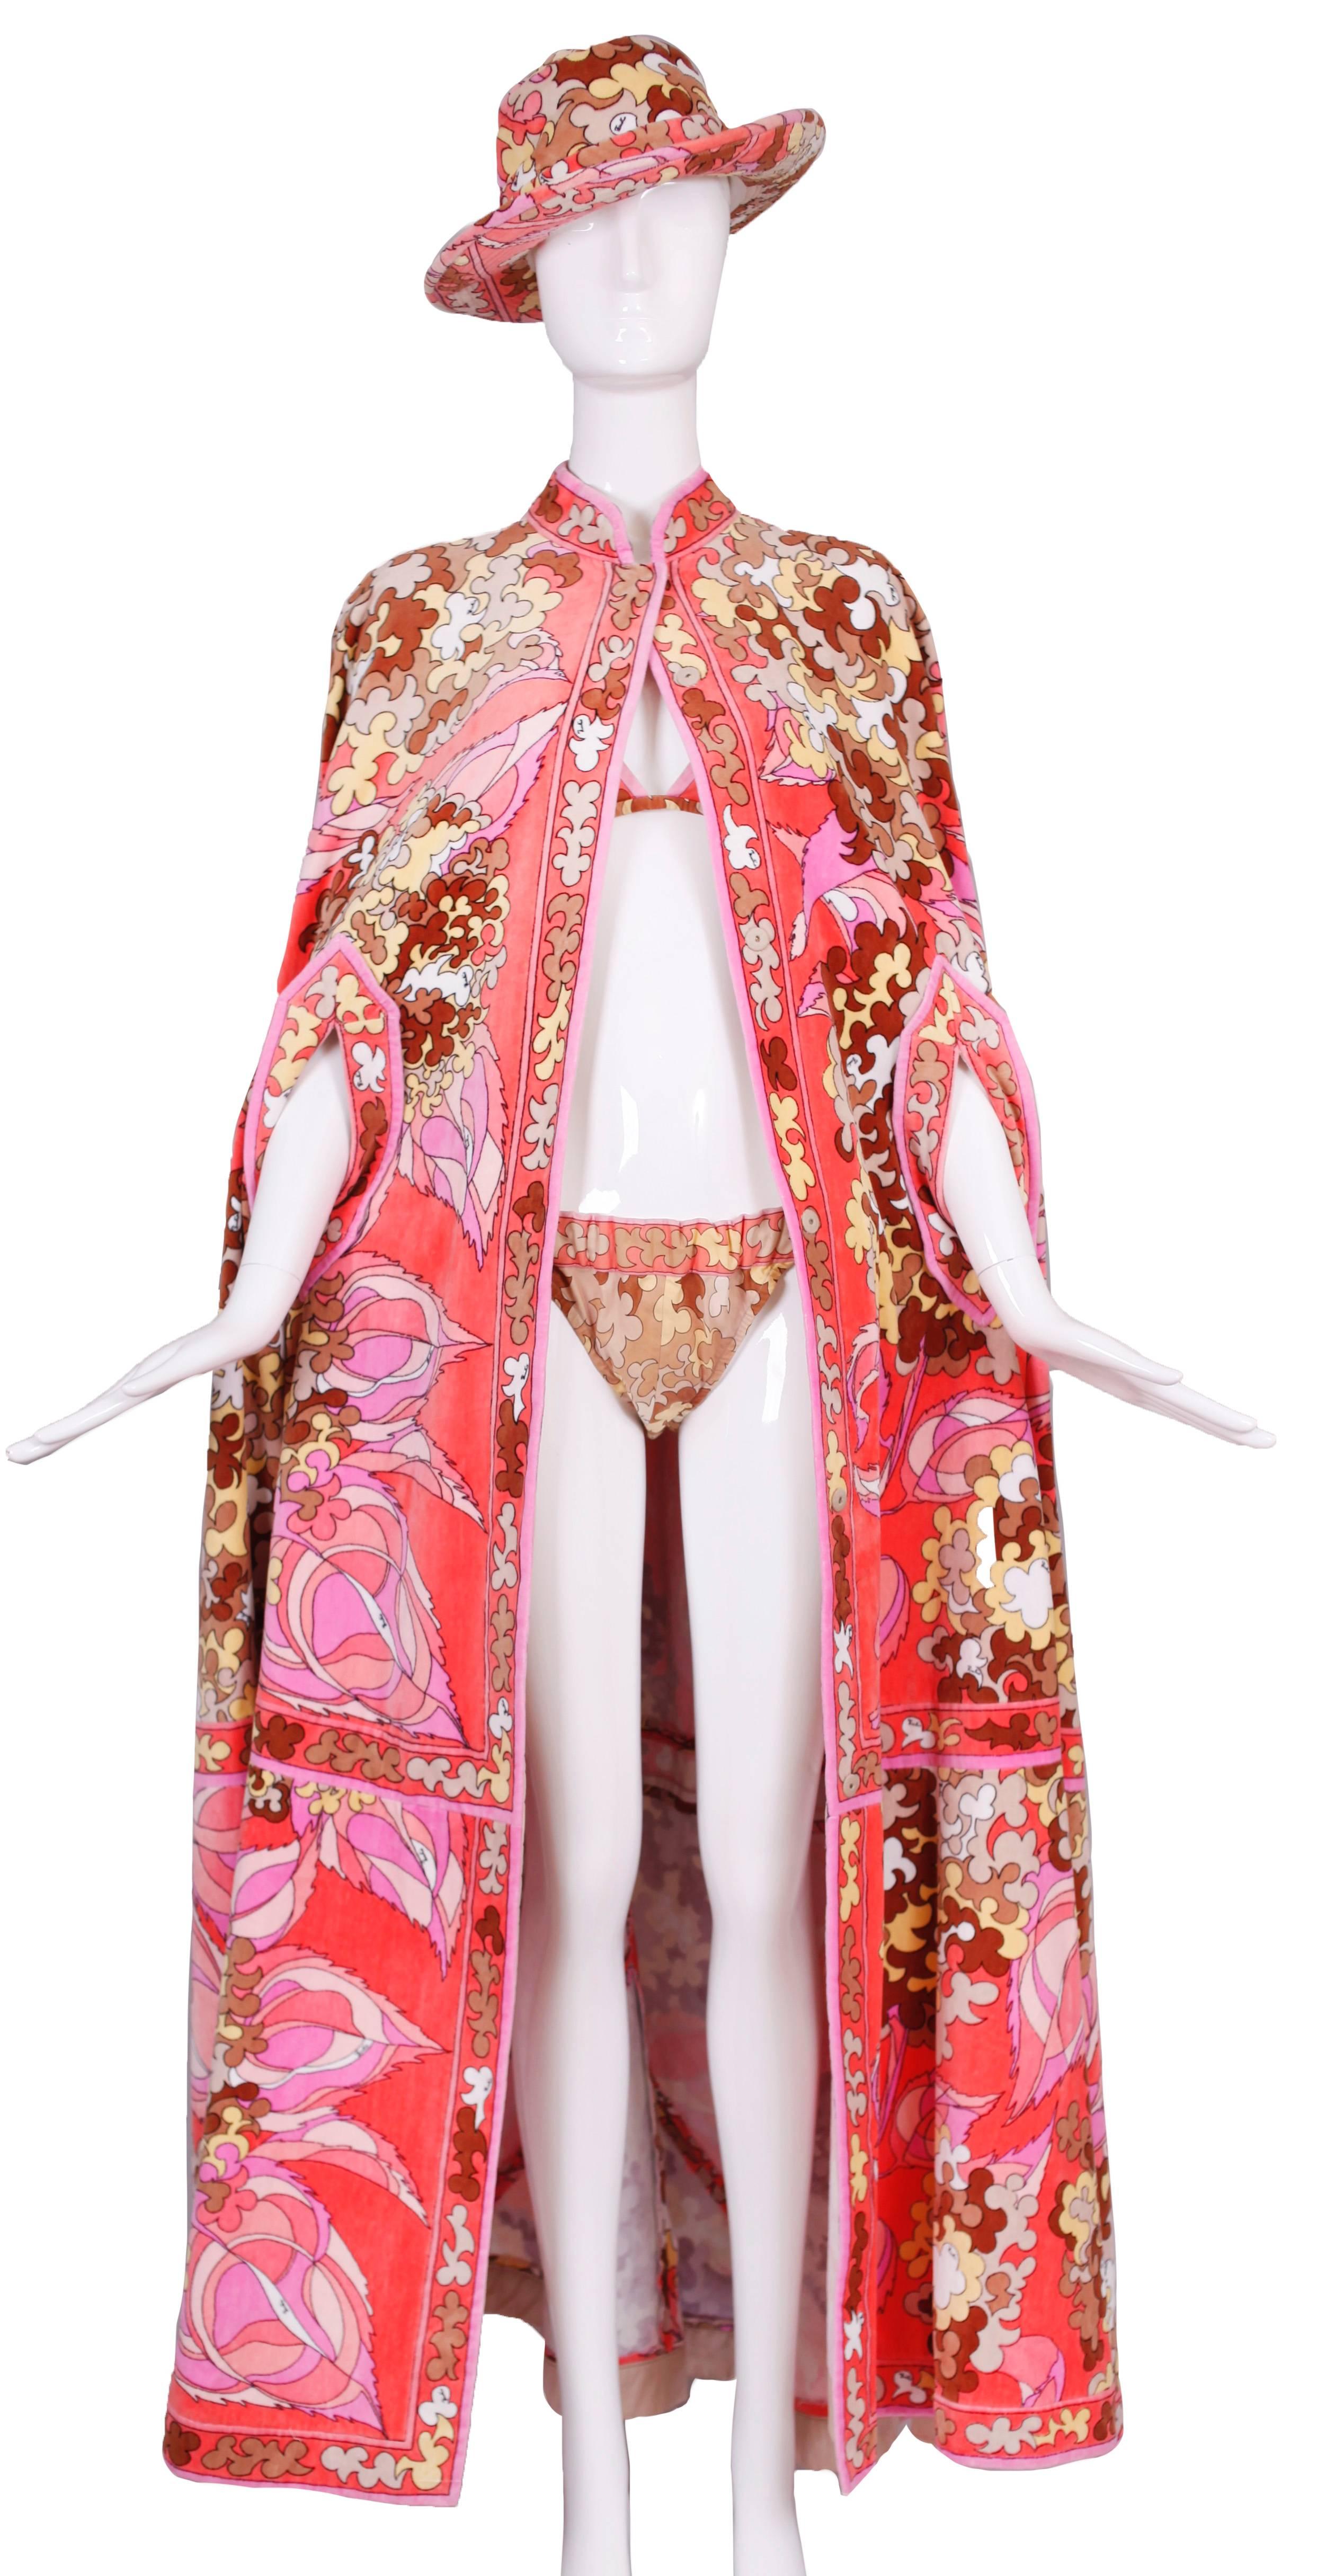 A 1960's/1970's Emilio Pucci terry cloth cape with matching terry cloth hat and cotton bikini set. The cape has a snap closure up the front and slits for arms. The bikini is cotton with a button closure at the top. The size tag for the cape is a 14